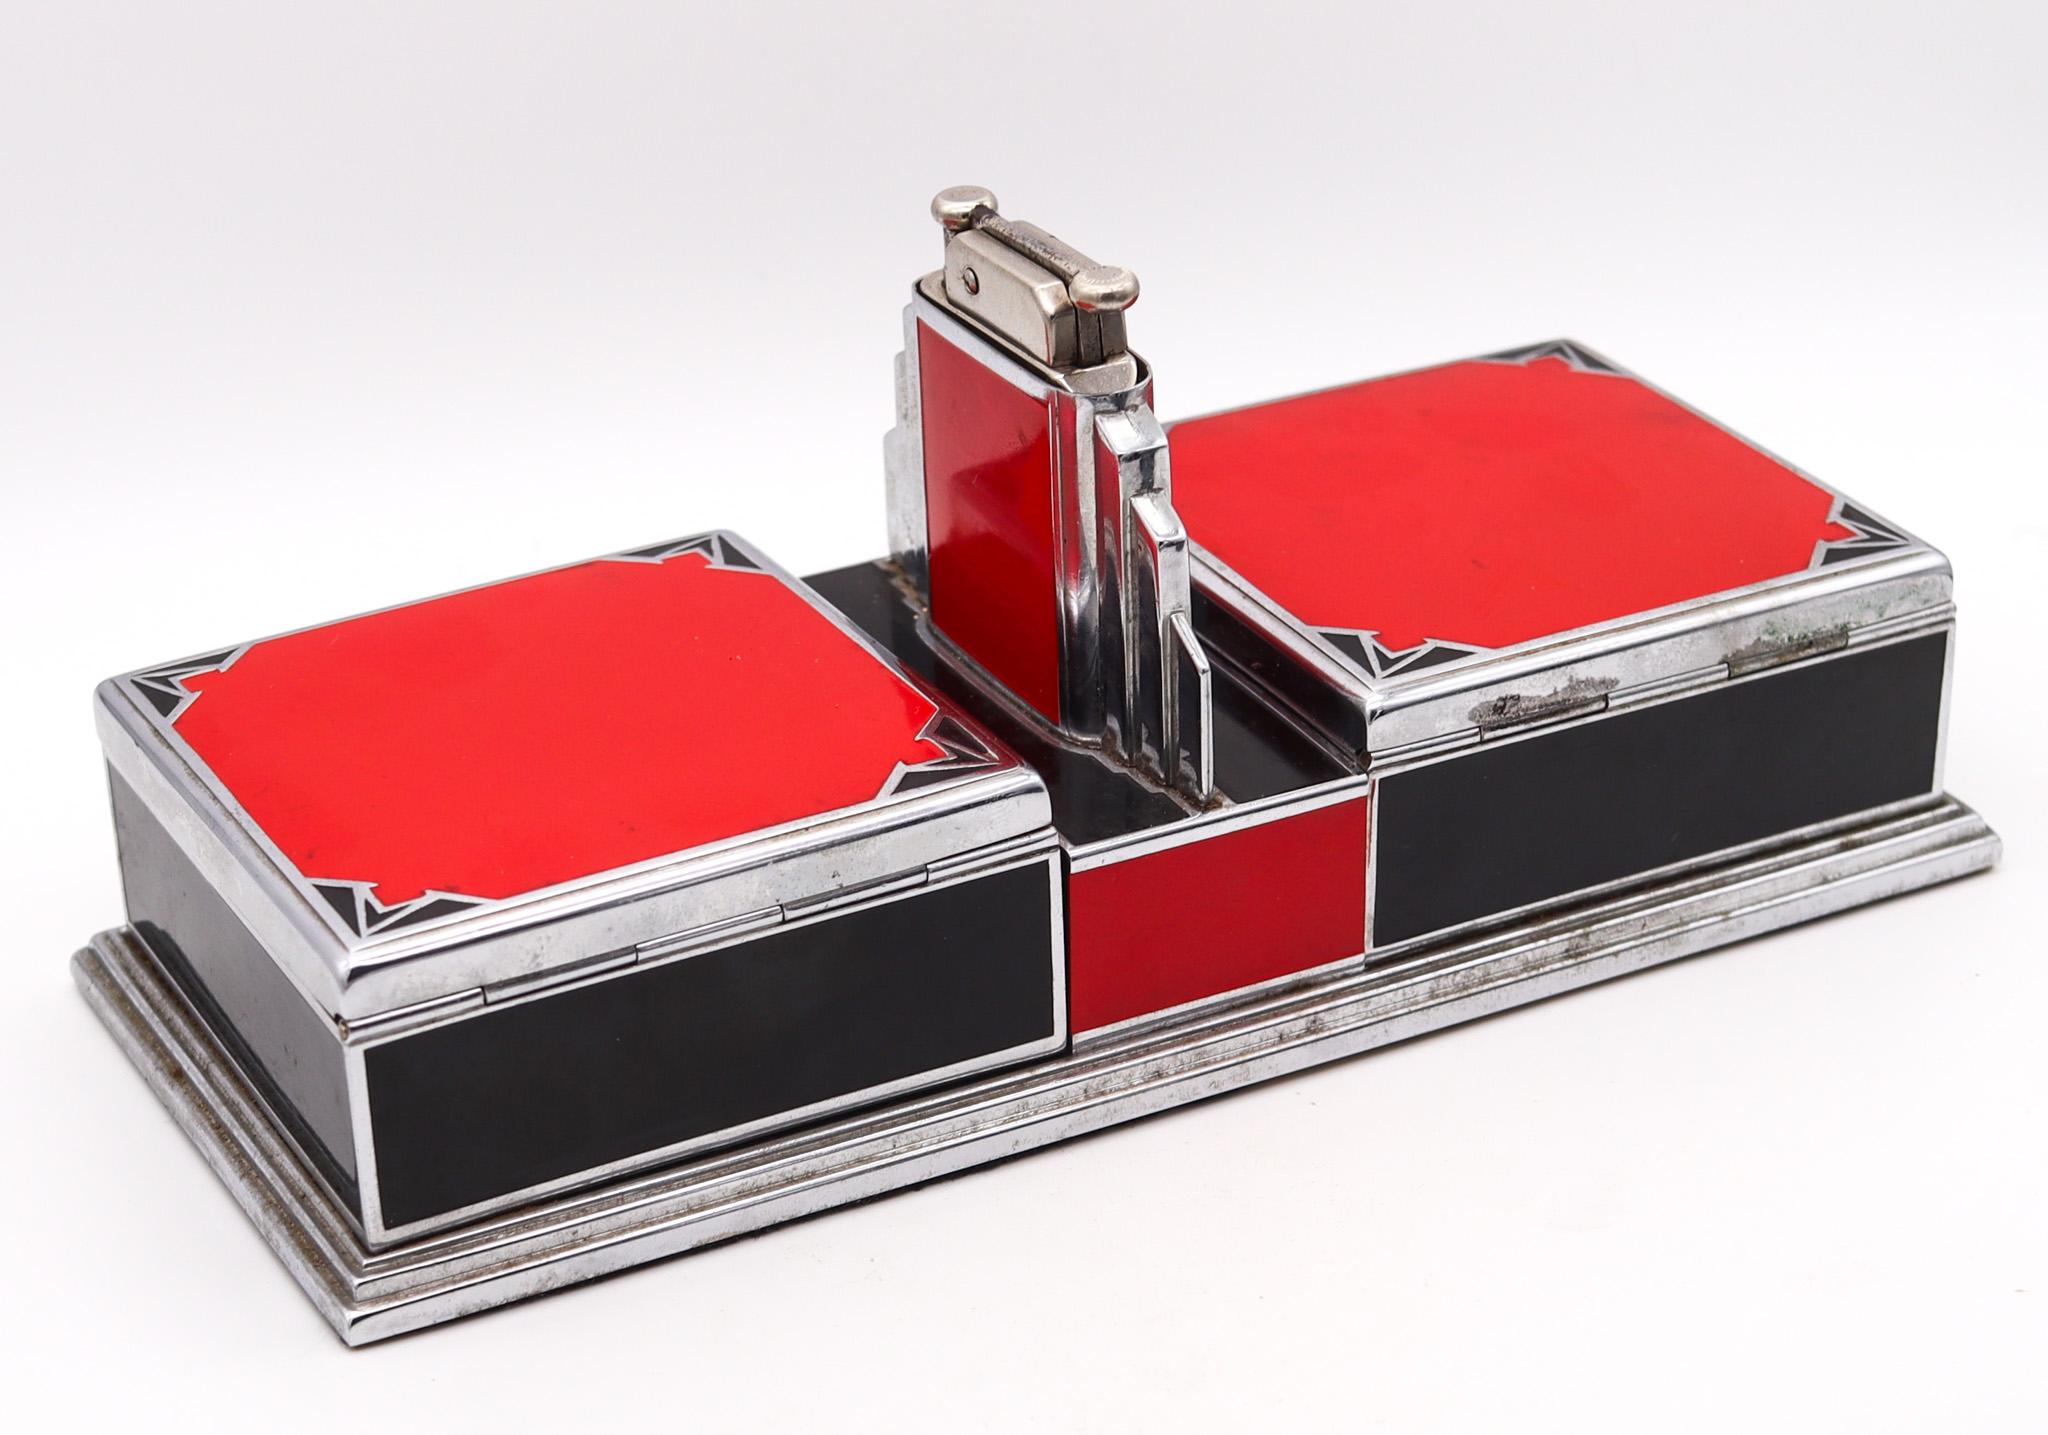 Hand-Crafted Otis Elgin Craft 1928 Art Deco Desk Cigarette Box And Lighter In Lacquered Steel For Sale